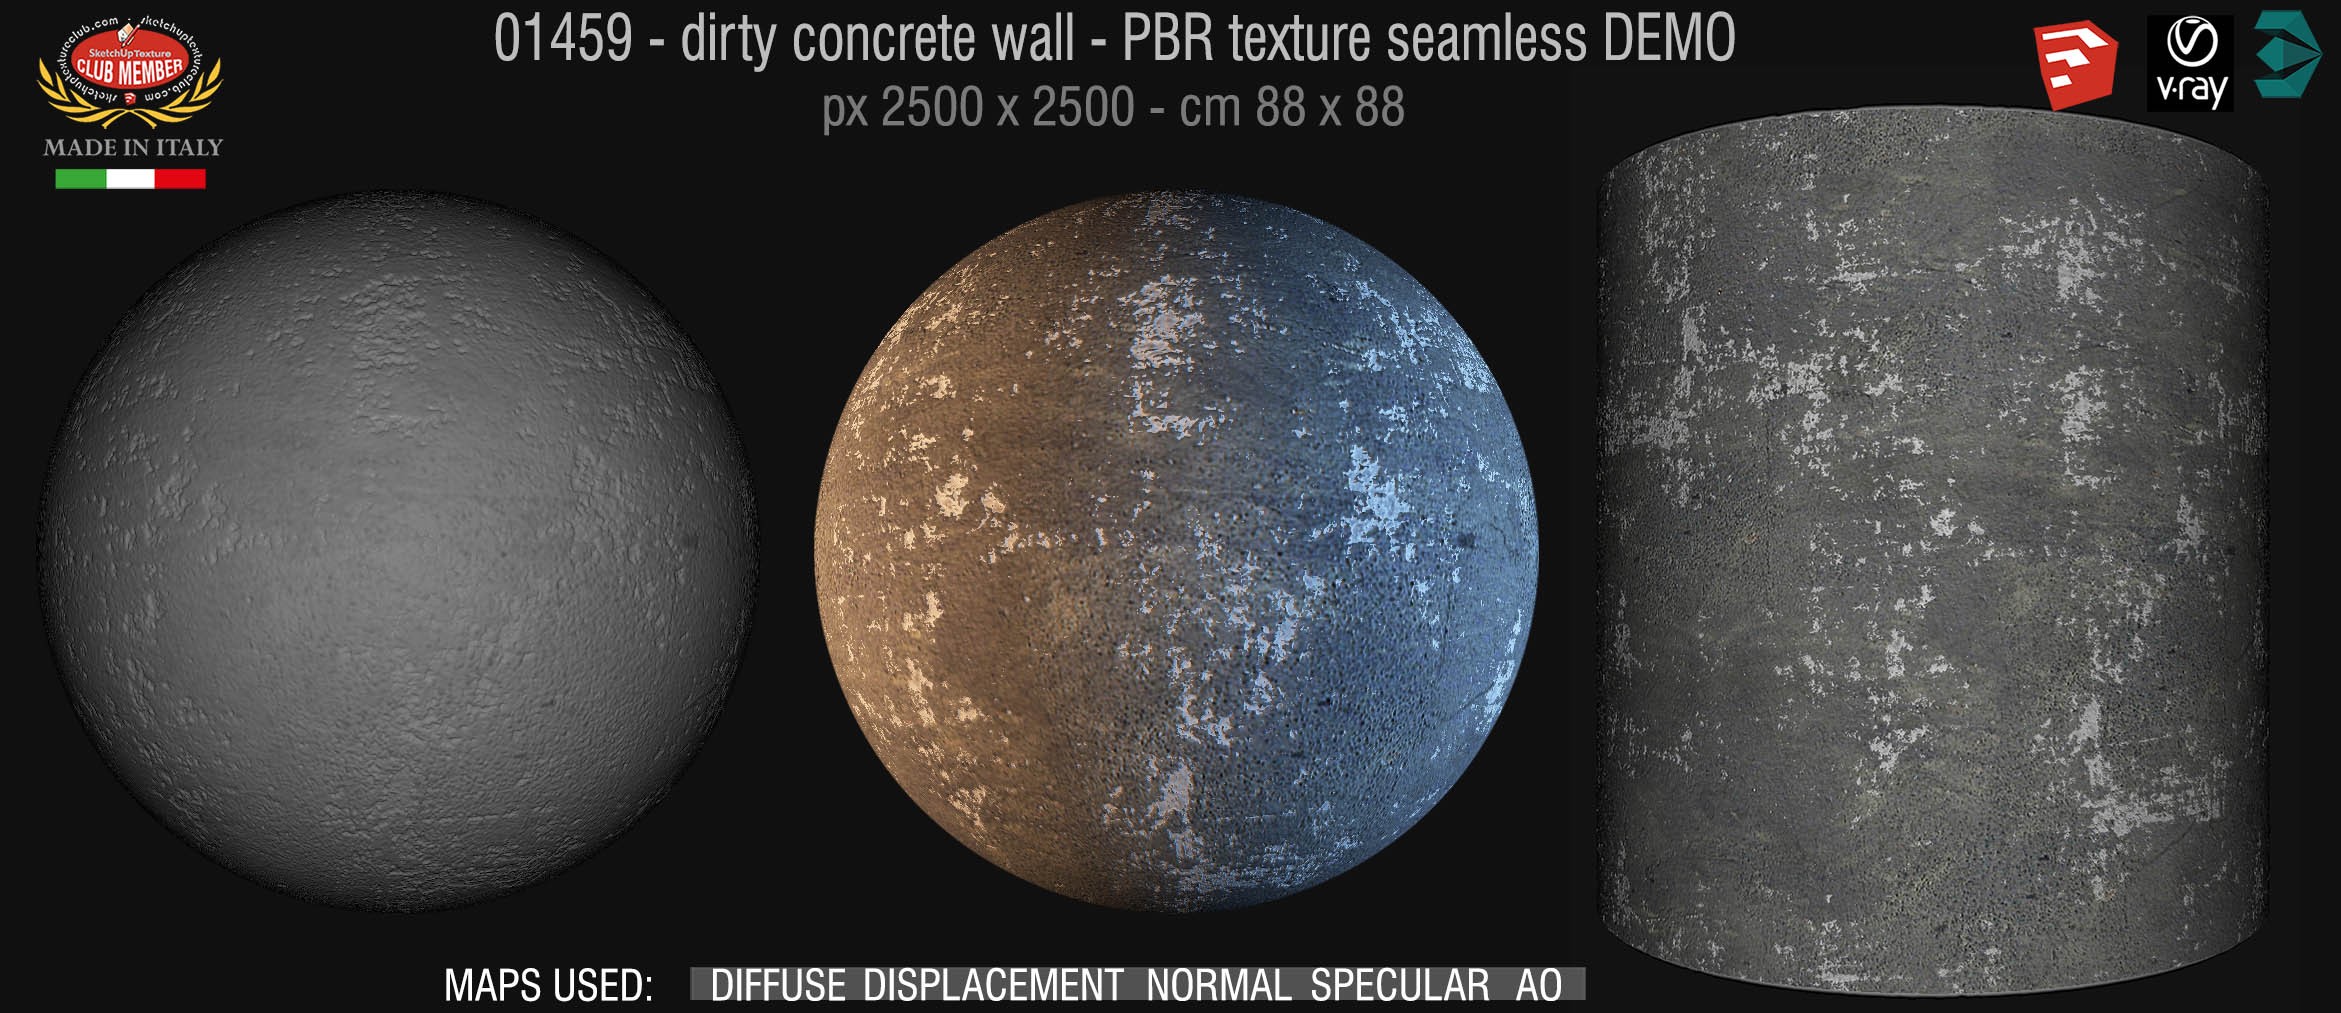 01459 Concrete bare dirty wall PBR texture seamless DEMO